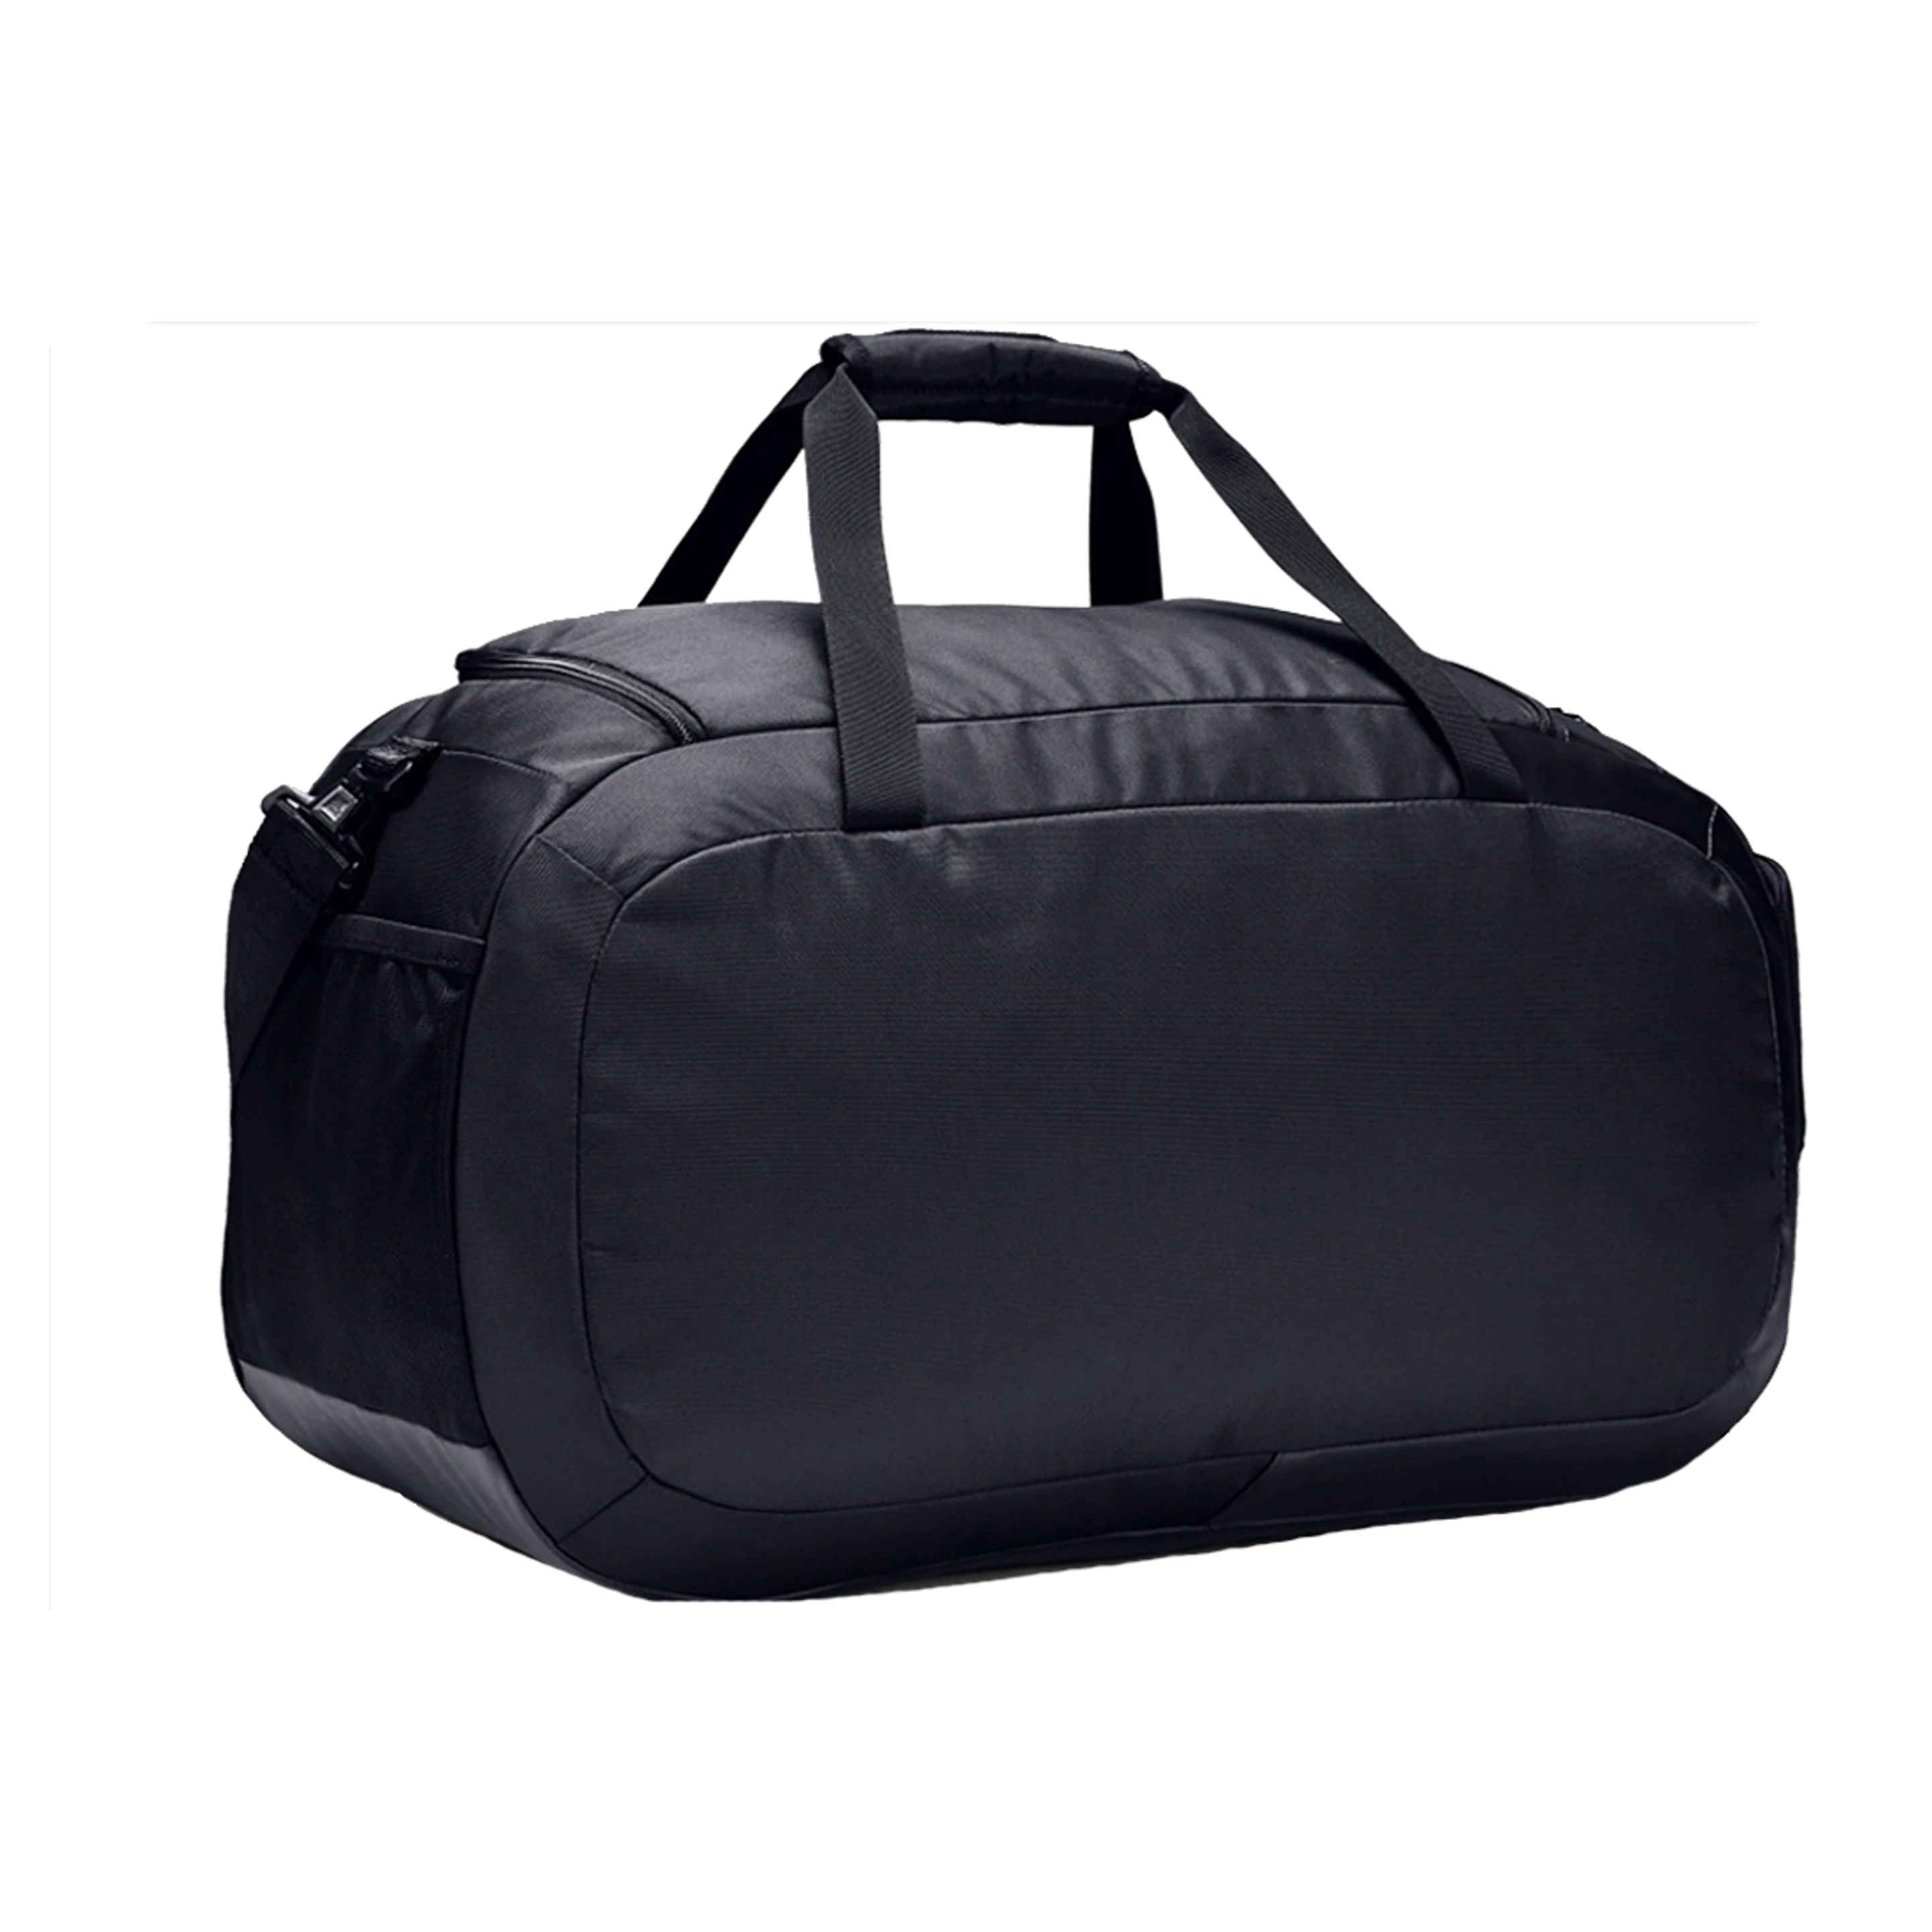 Under Armour Undeniable Duffel 4.0 Md 1342657-001